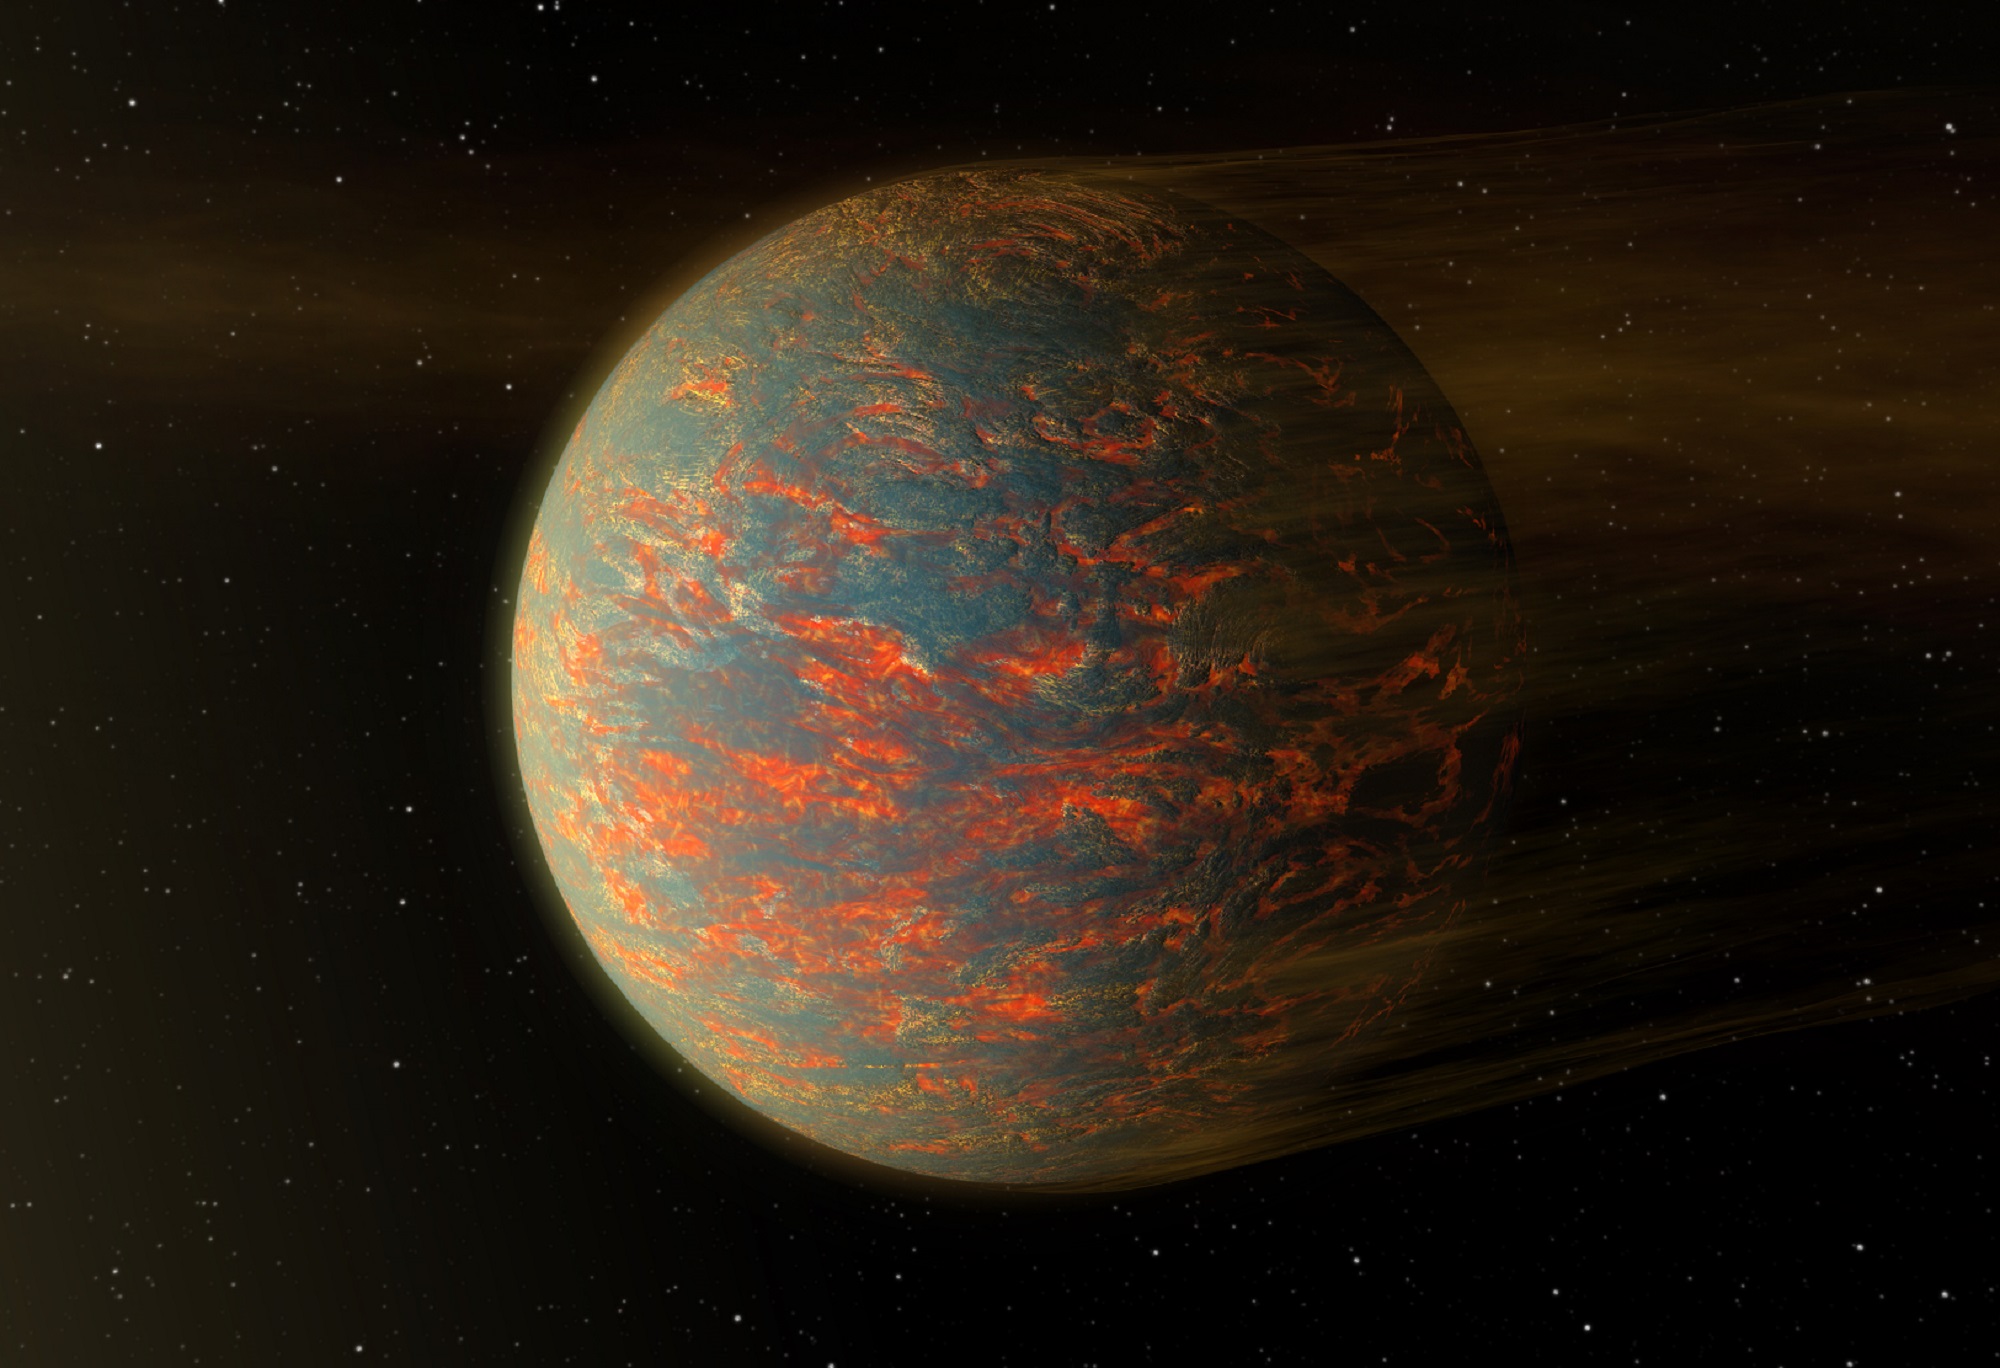 an orange and gray fiery looking exoplanet illustrated by an artist